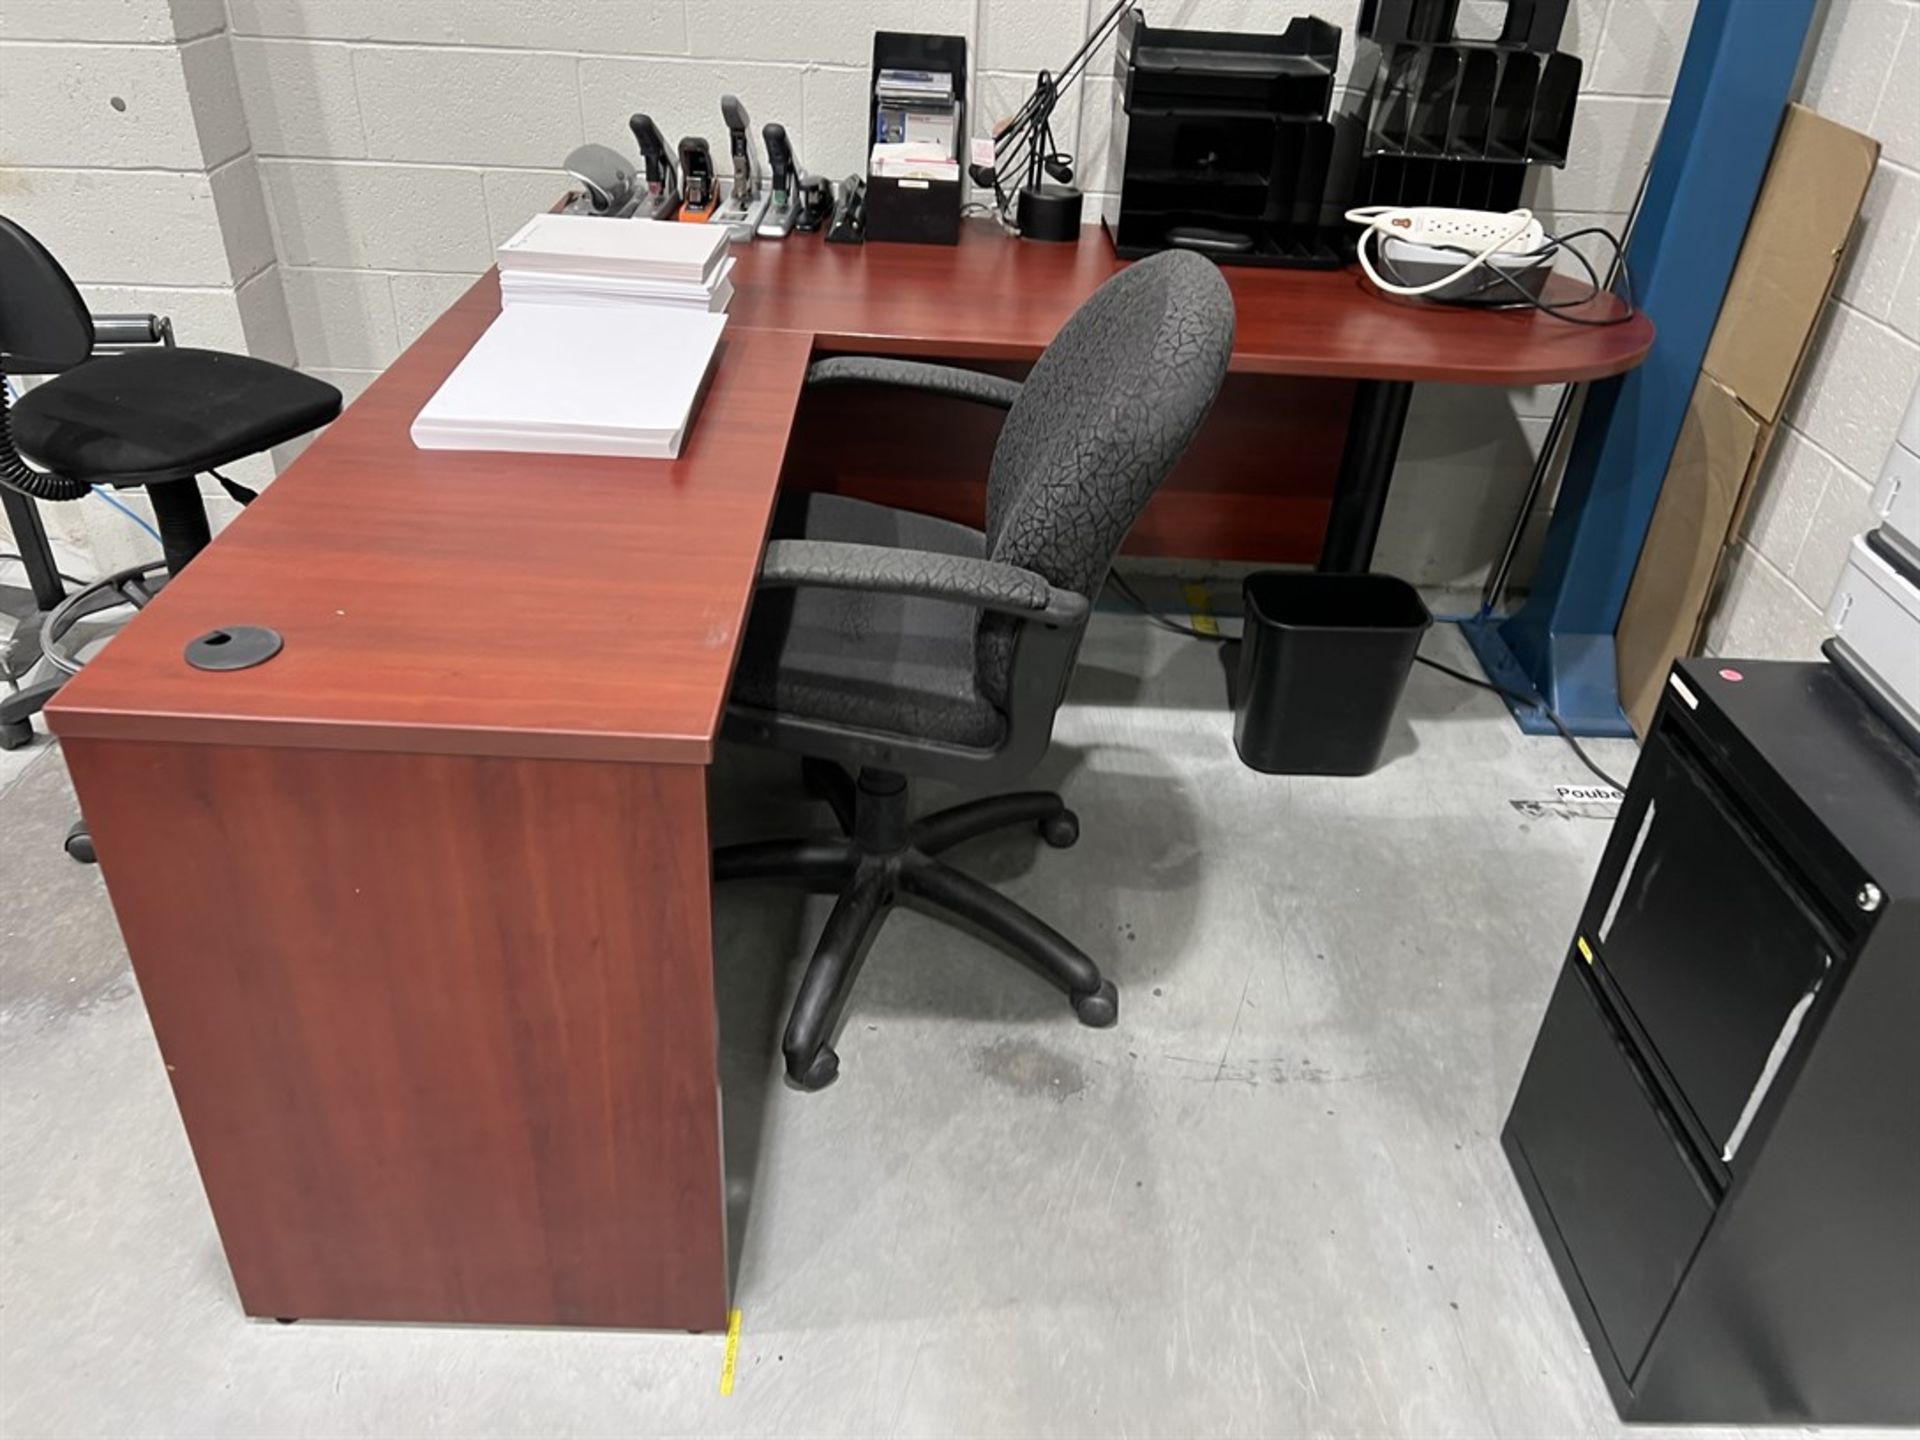 Lot of (3) Desks and Chairs (No Electronics) (In CMM Room) - Image 2 of 3